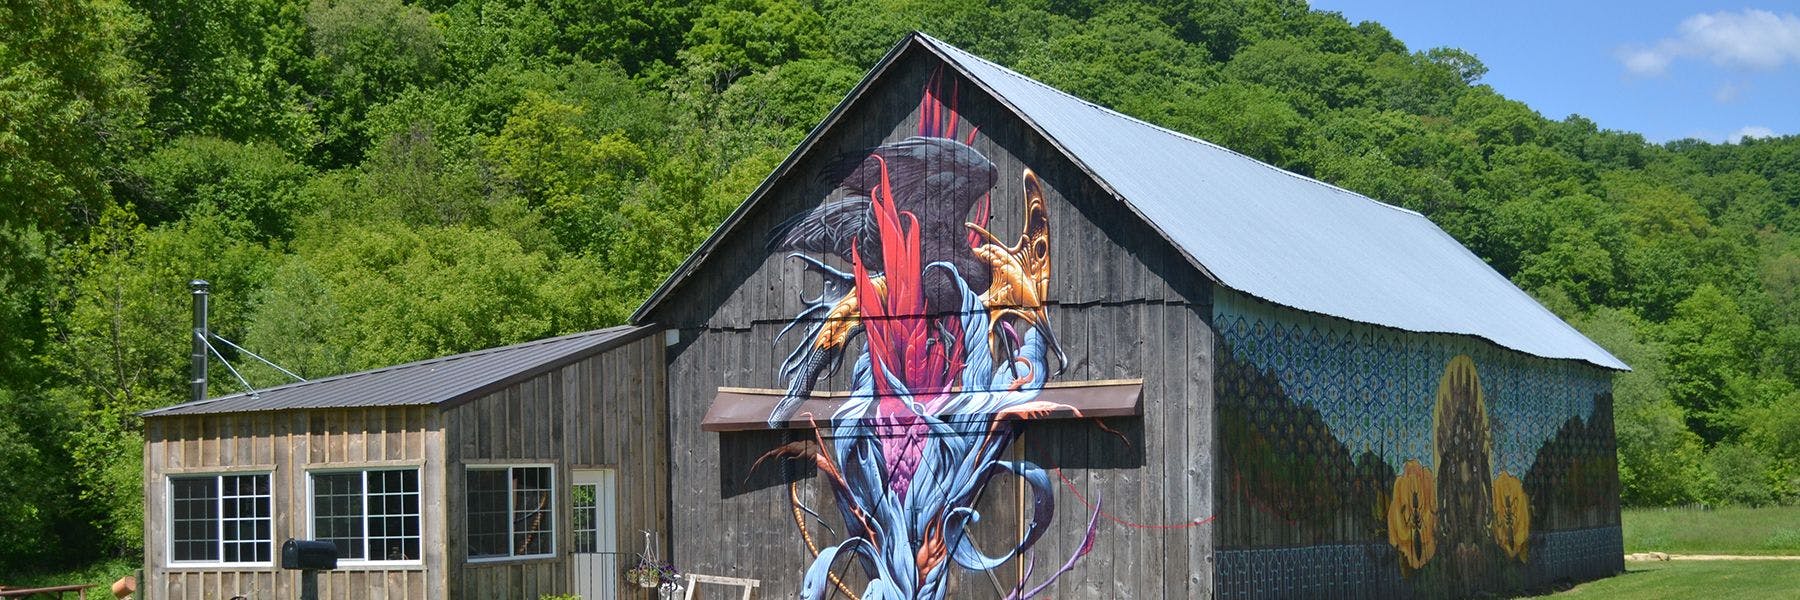 Farm Art mural on a barn nestled in a valley of Wisconsin.